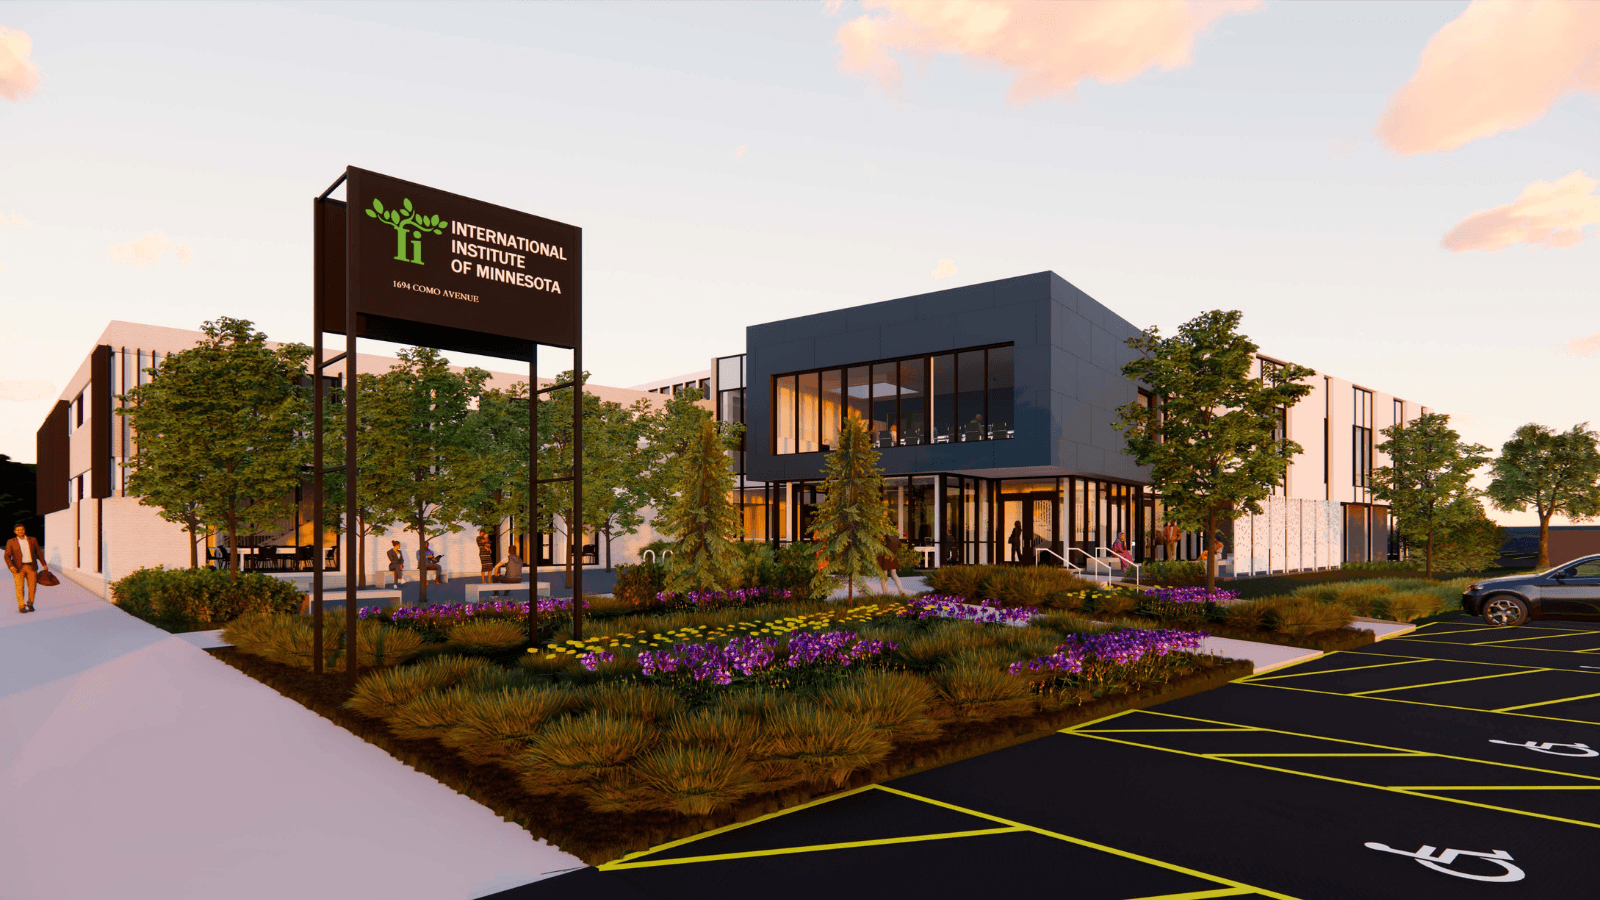 A graphic rendering of the remodeled building at 1694 Como Avenue.